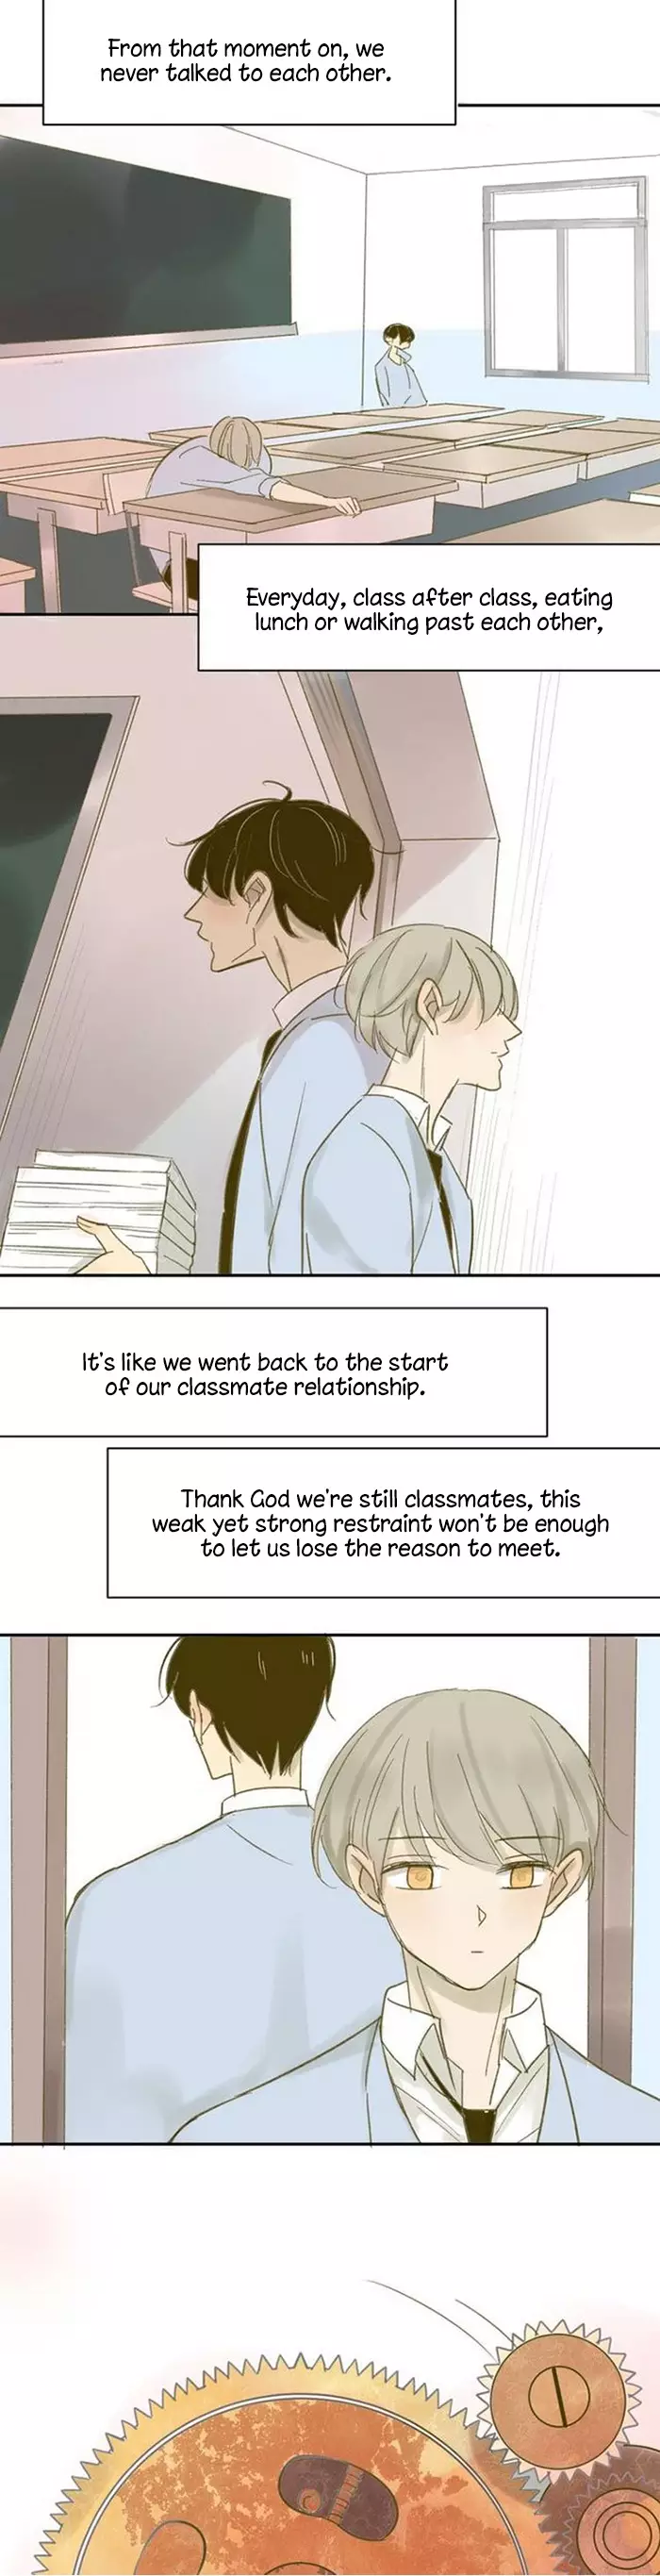 Classmate Relationship? - 67 page 11-2a45b0f5